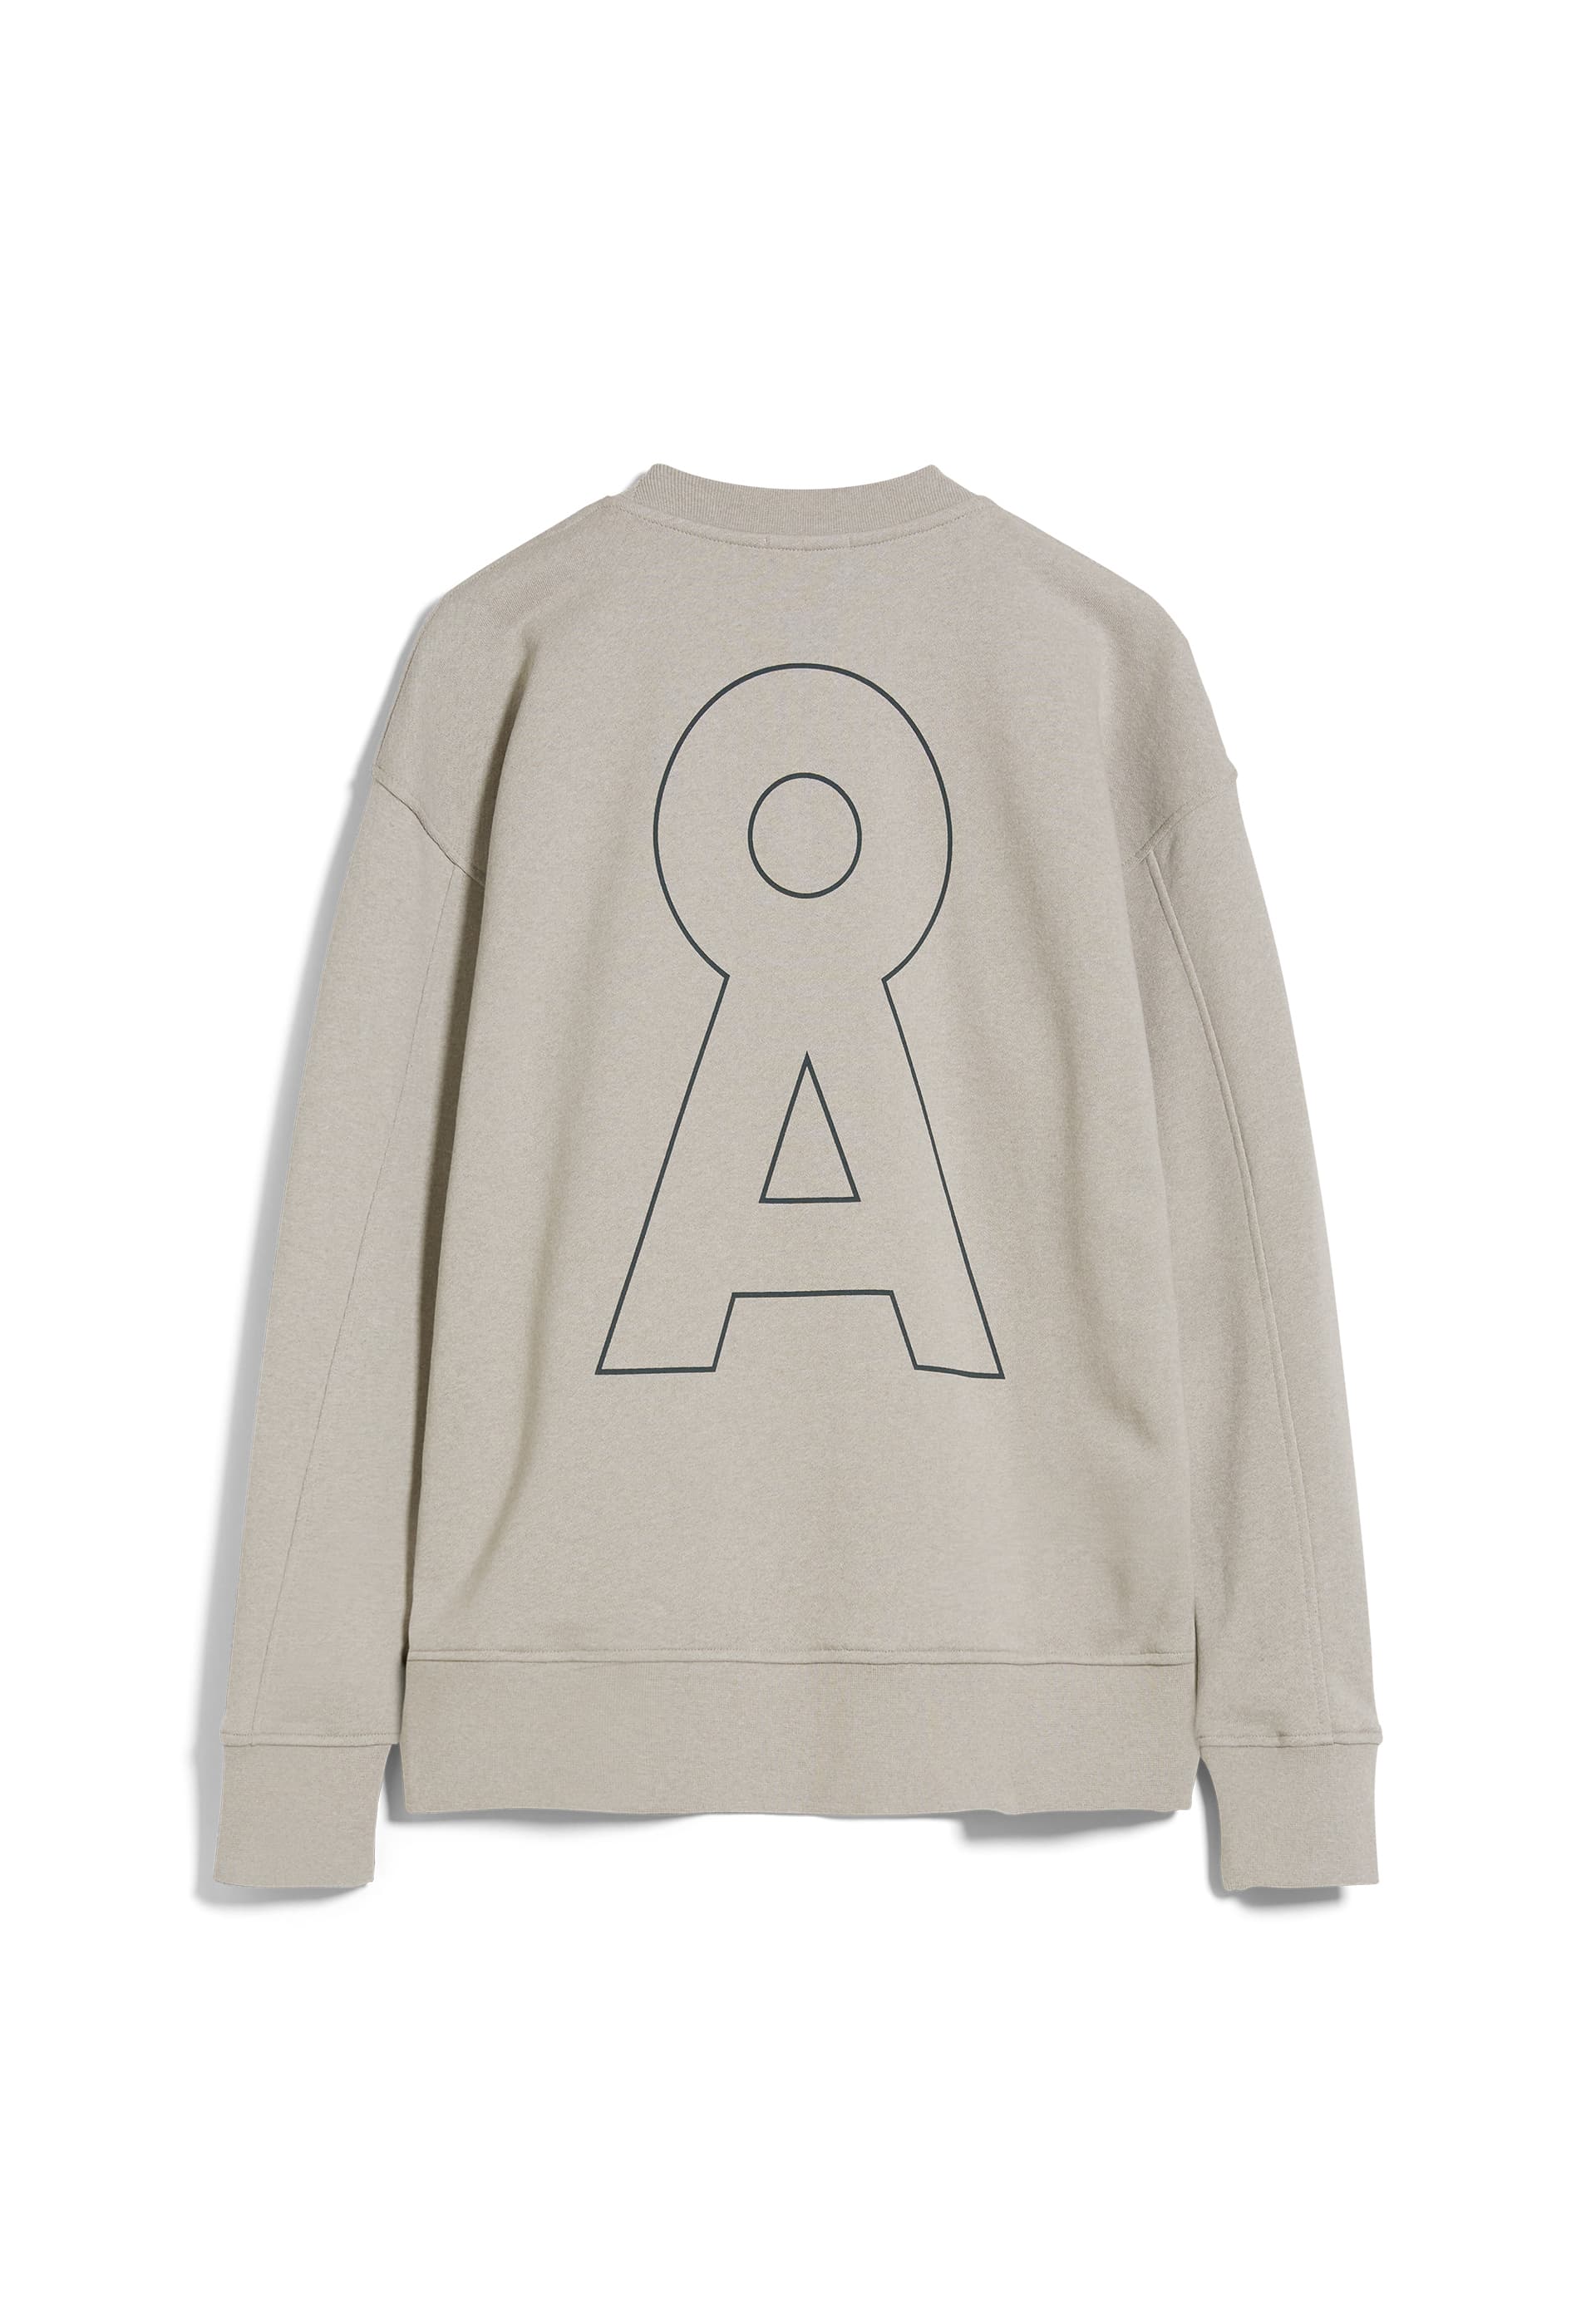 AARLO HELLOCINATION Sweatshirt Relaxed Fit made of Organic Cotton Mix